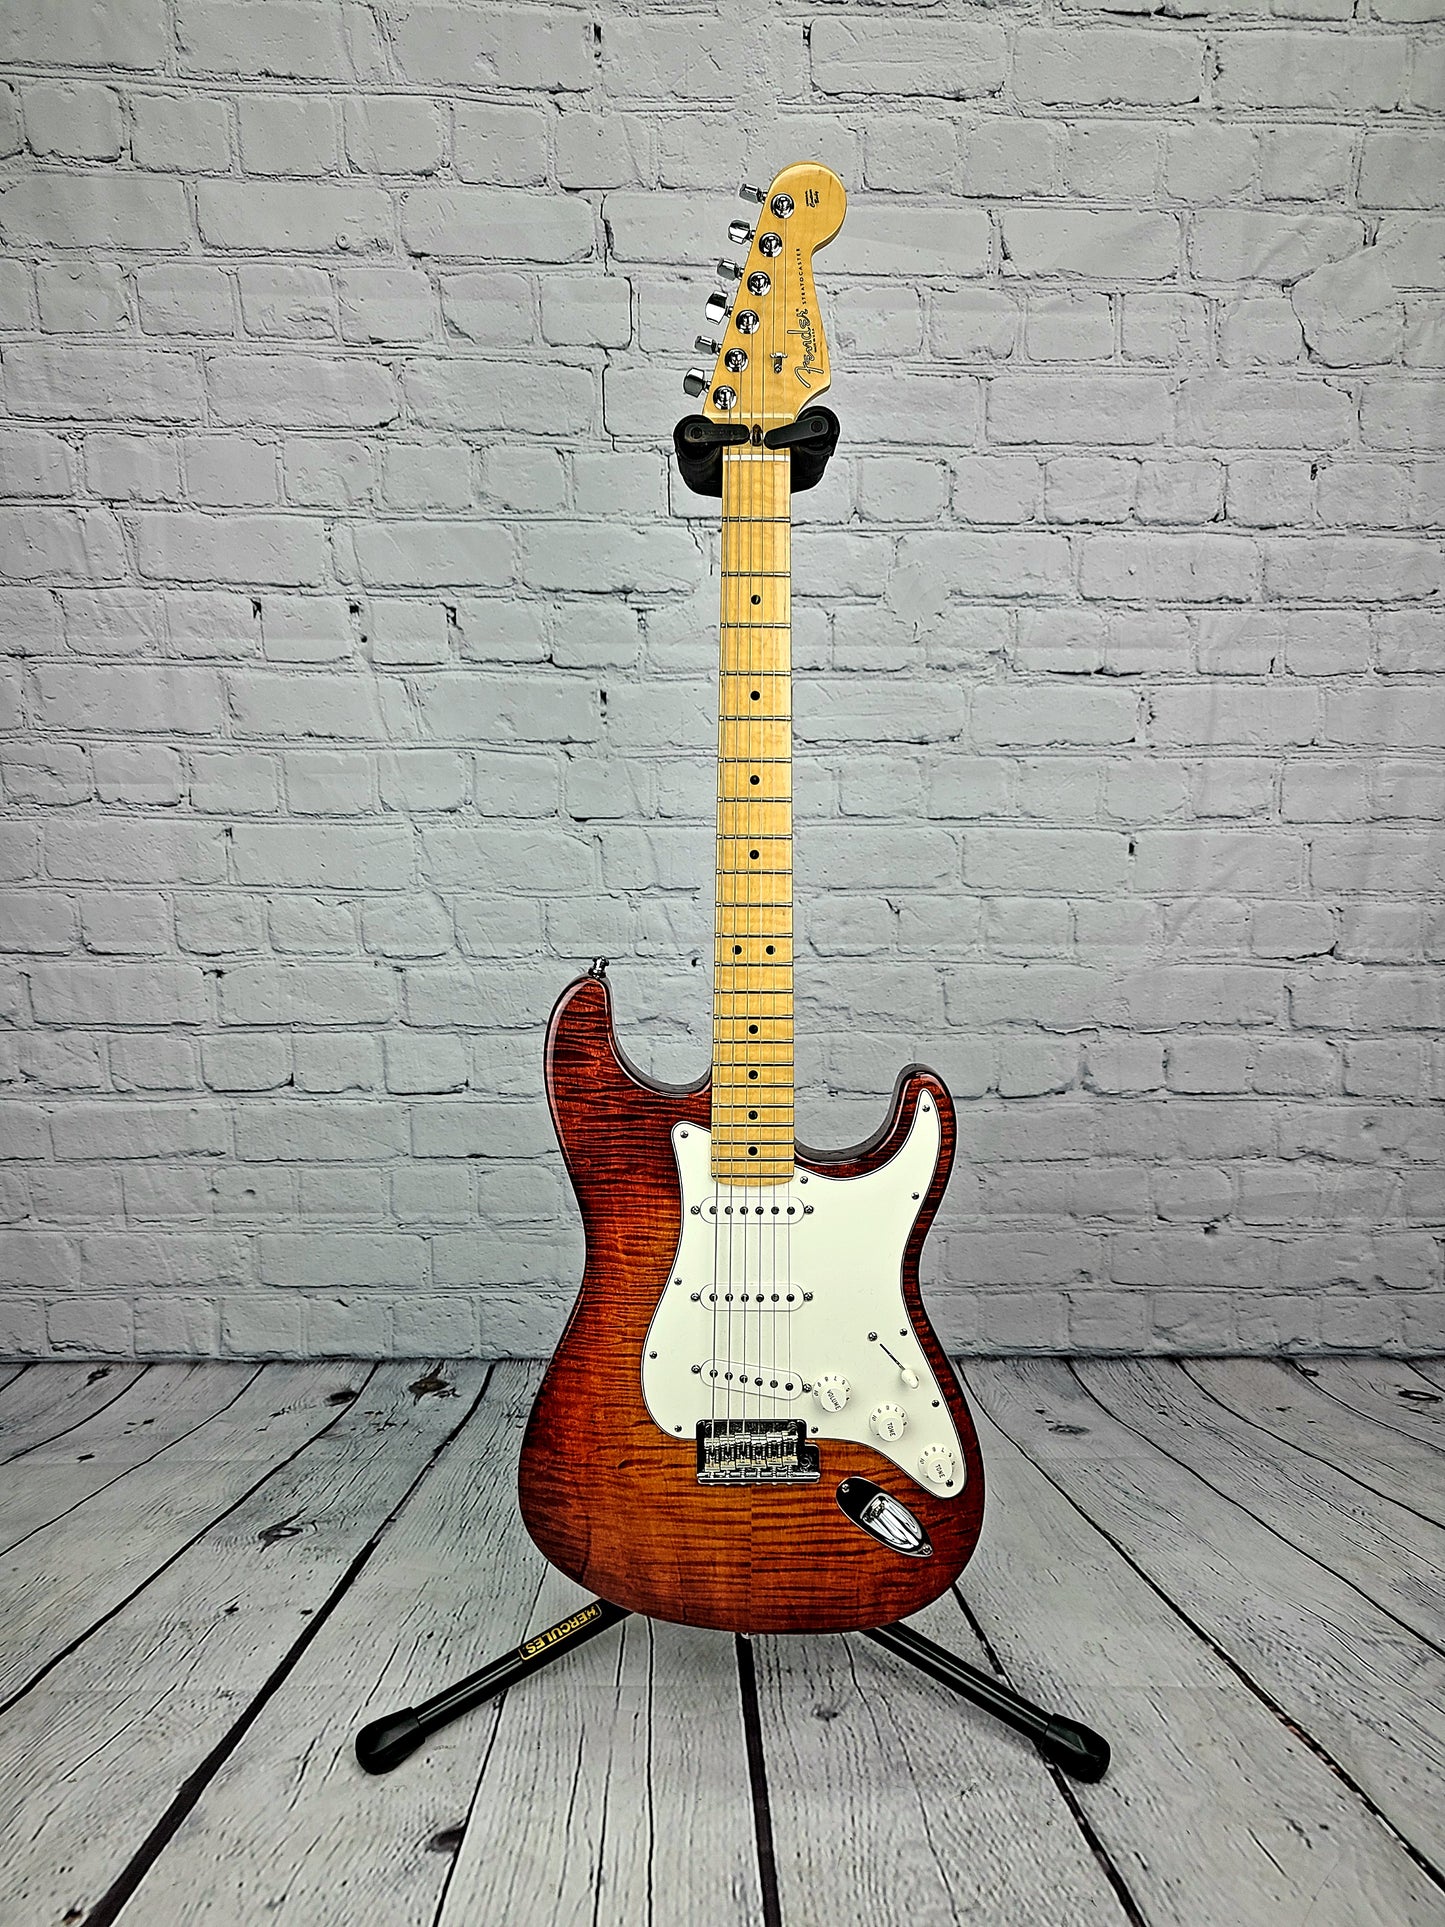 USED 2011 Fender American Select Stratocaster USA Flame Top Cherry Burst Figured Maple Neck